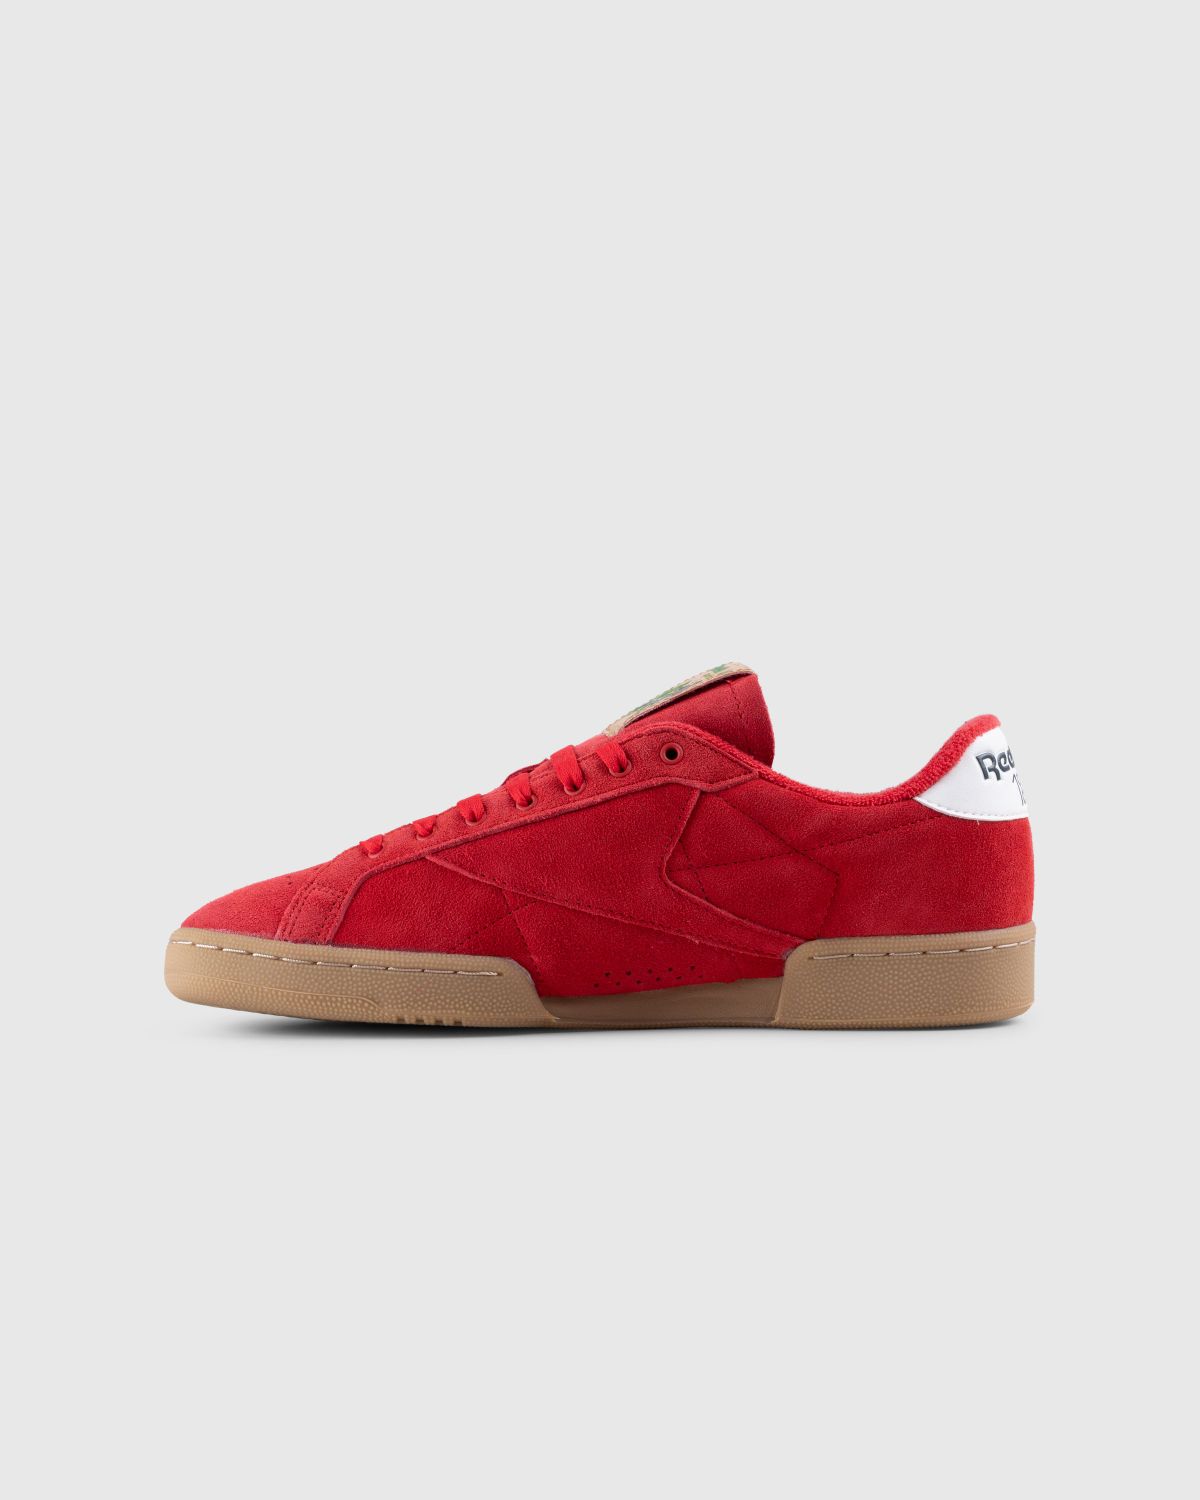 Reebok – Club C Grounds Red - Sneakers - Red - Image 2